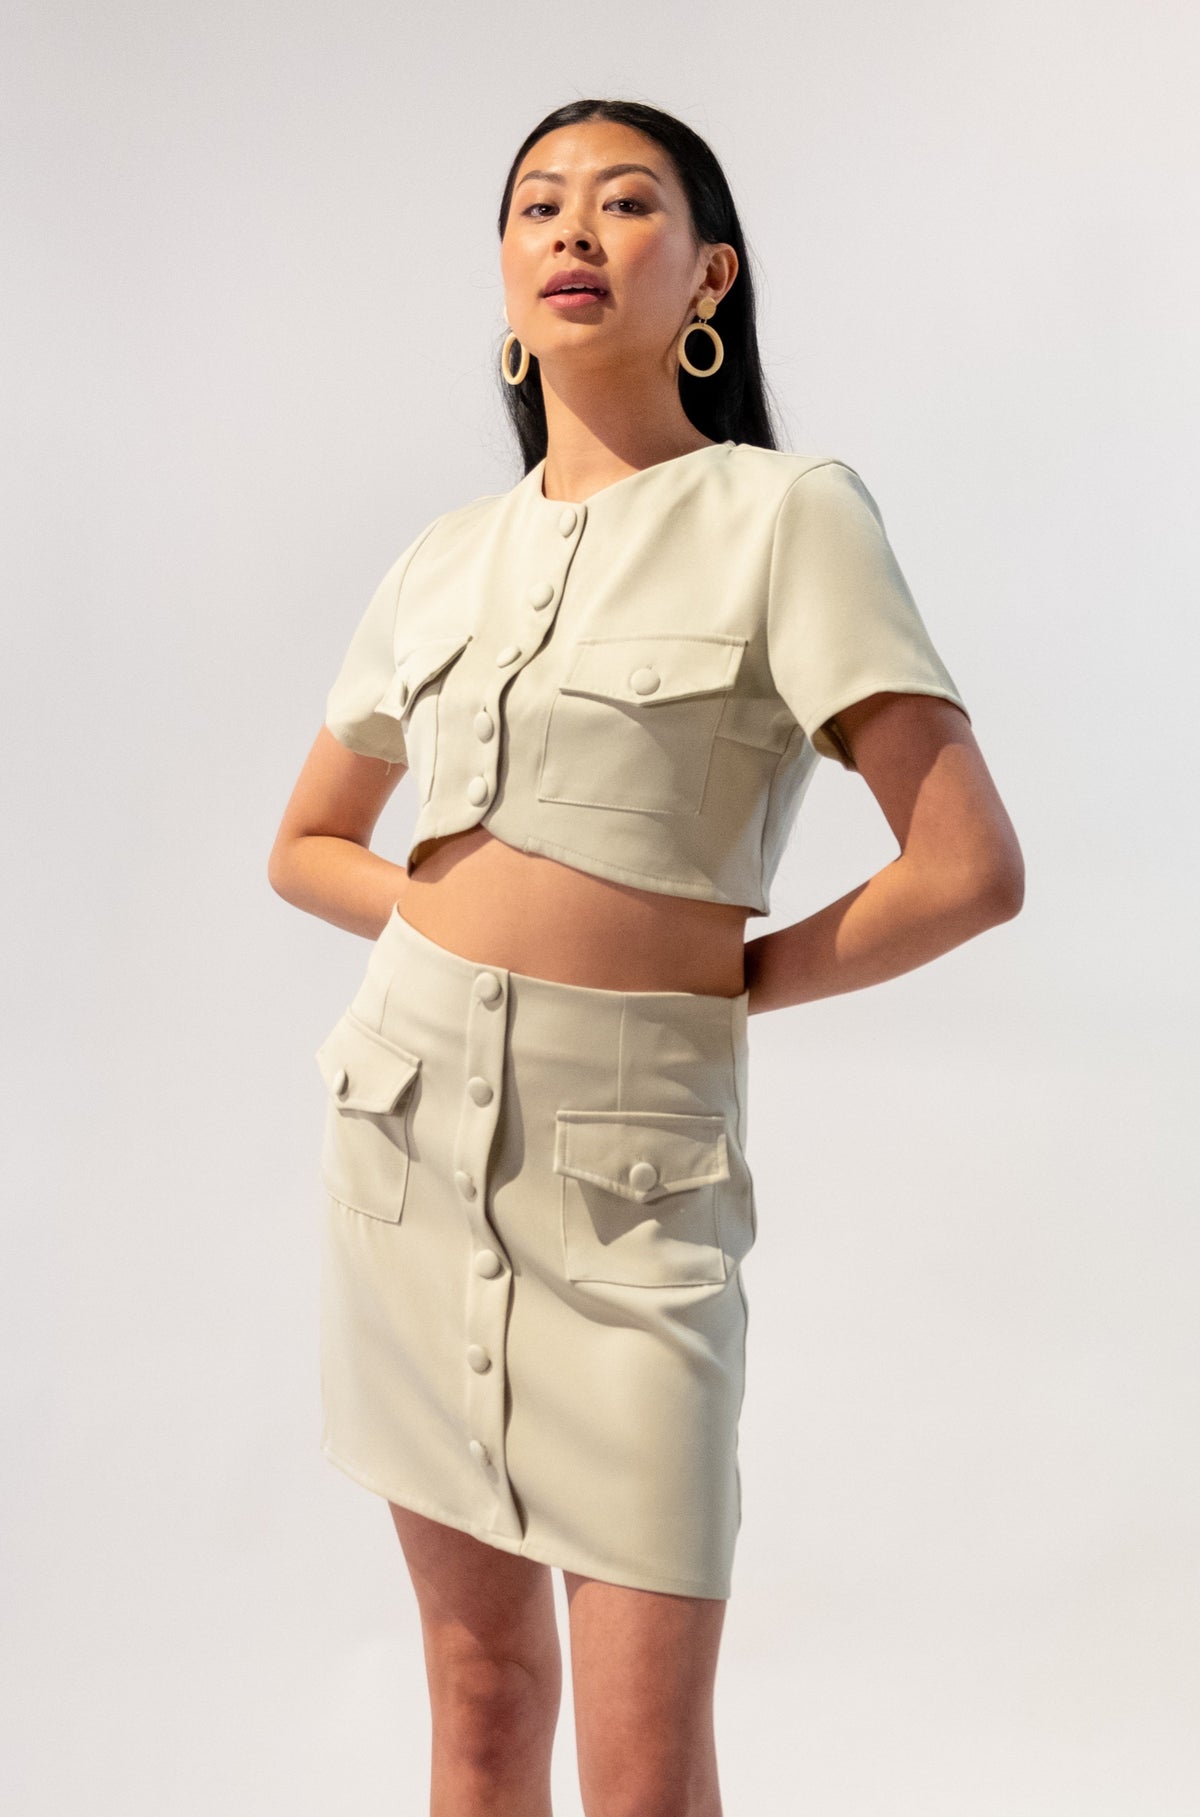 Model wearing a chic short sleeve button-up crop top and button skirt set in beige